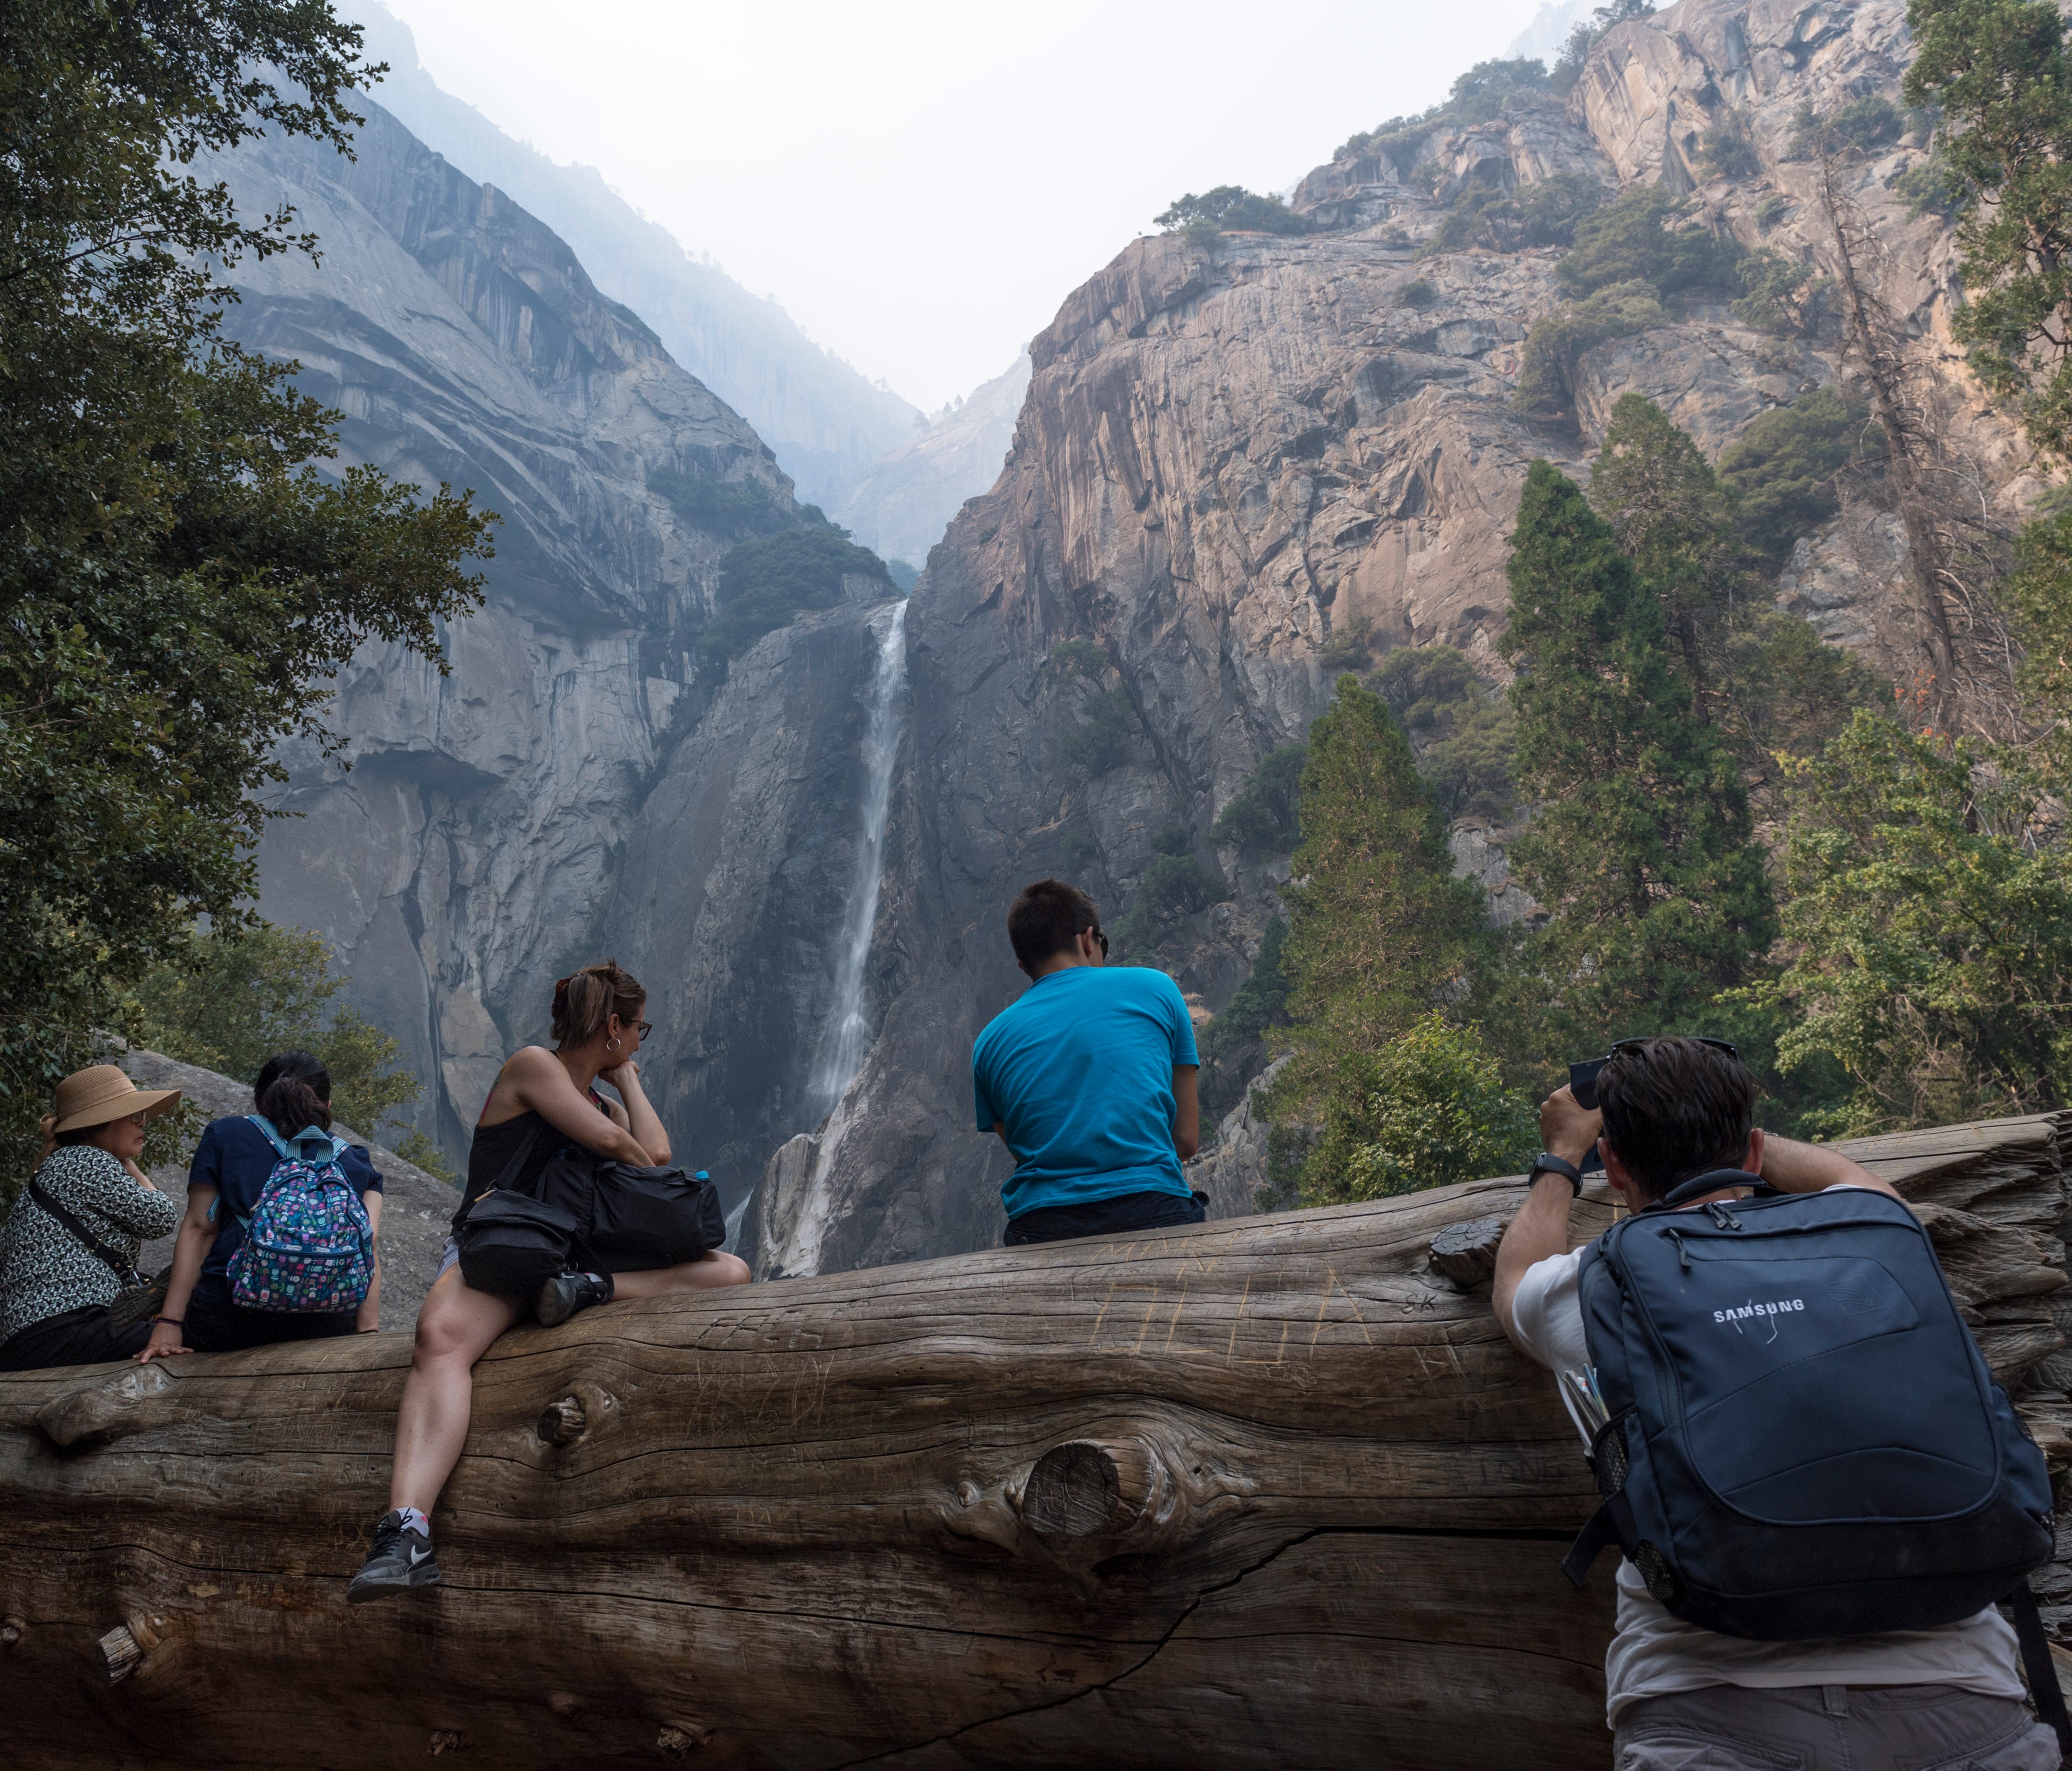 Lower Yosemite Falls is just one of the landmark vistas obscured by smoke from the Ferguson Fire in Yosemite National Park on Tuesday, July 24, 2018.